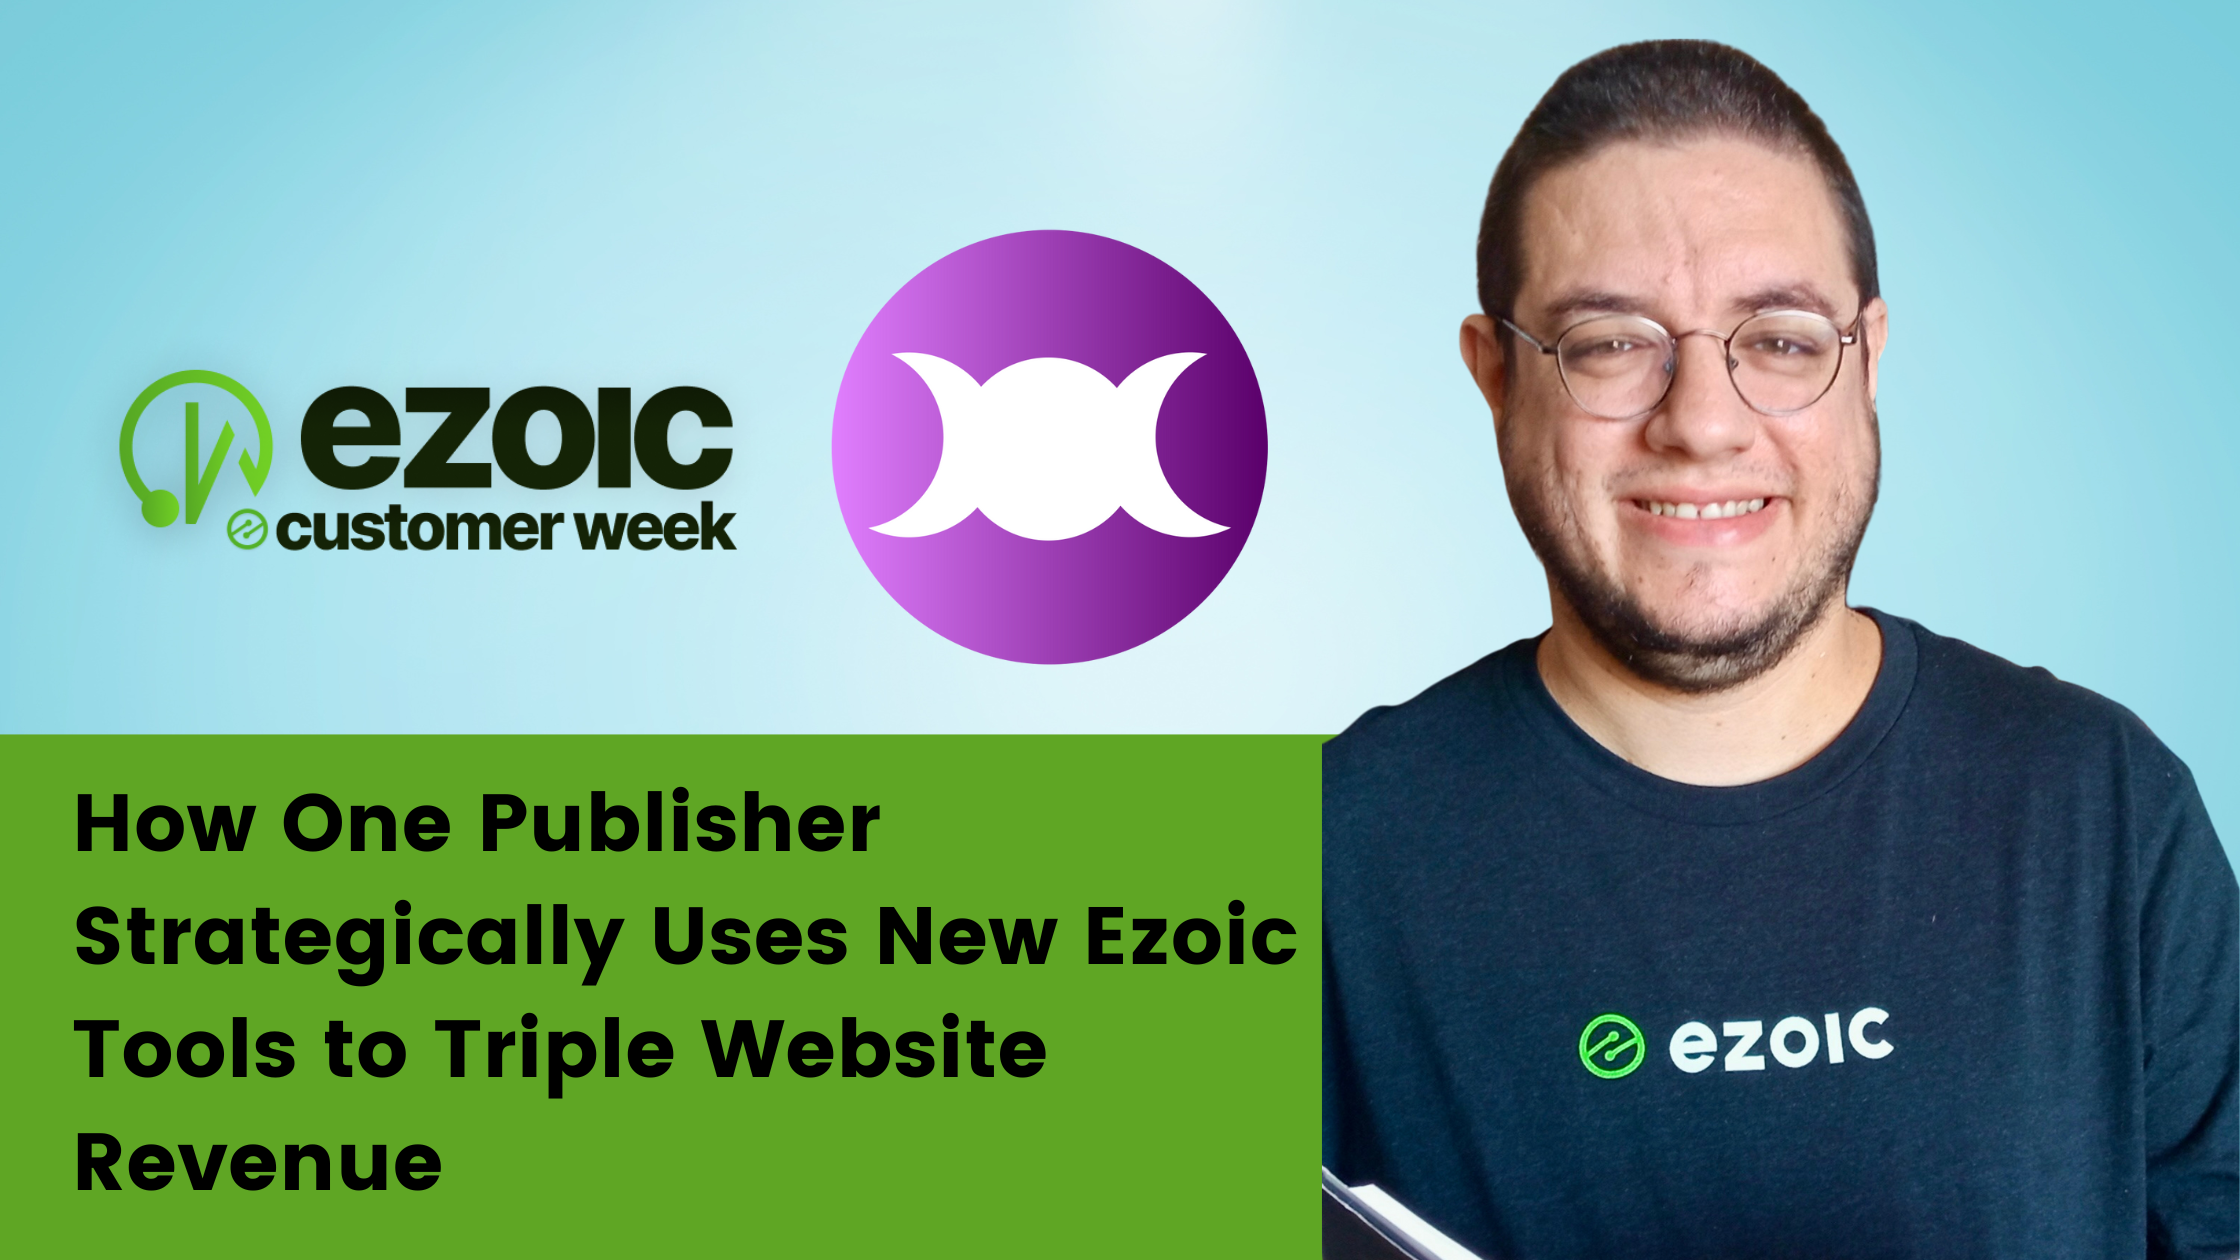 How One Publisher Strategically Uses New Ezoic Tools to Triple Website Revenue